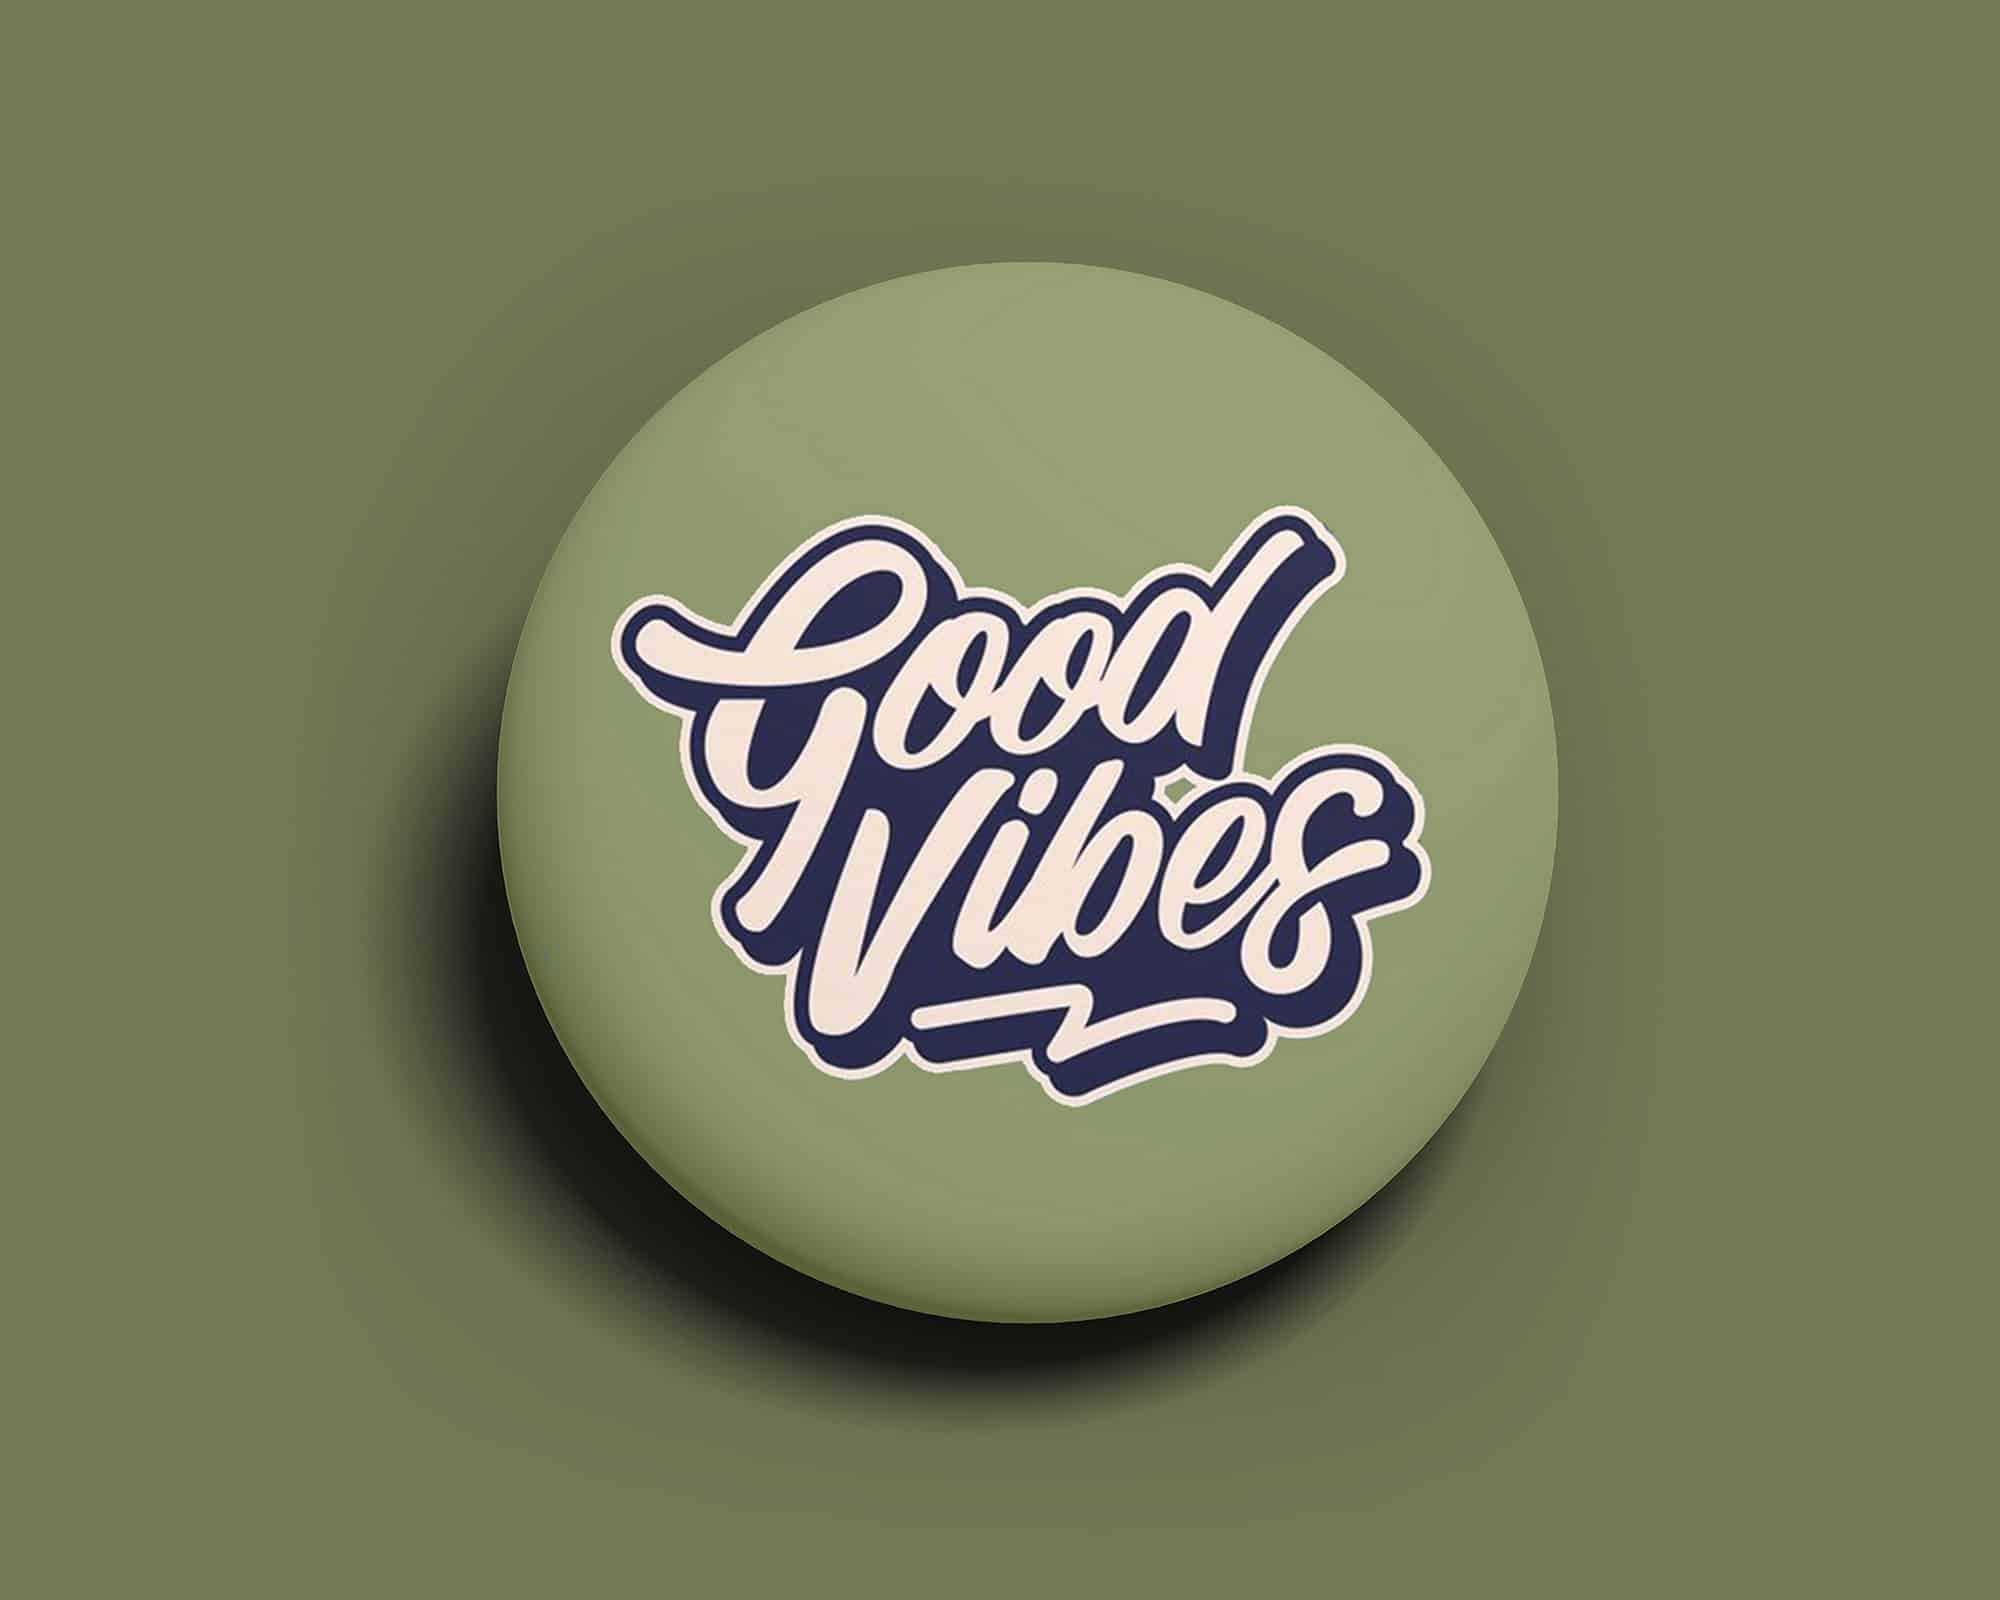 Logo for a Candy Store “Good Vibes” | Freelancer